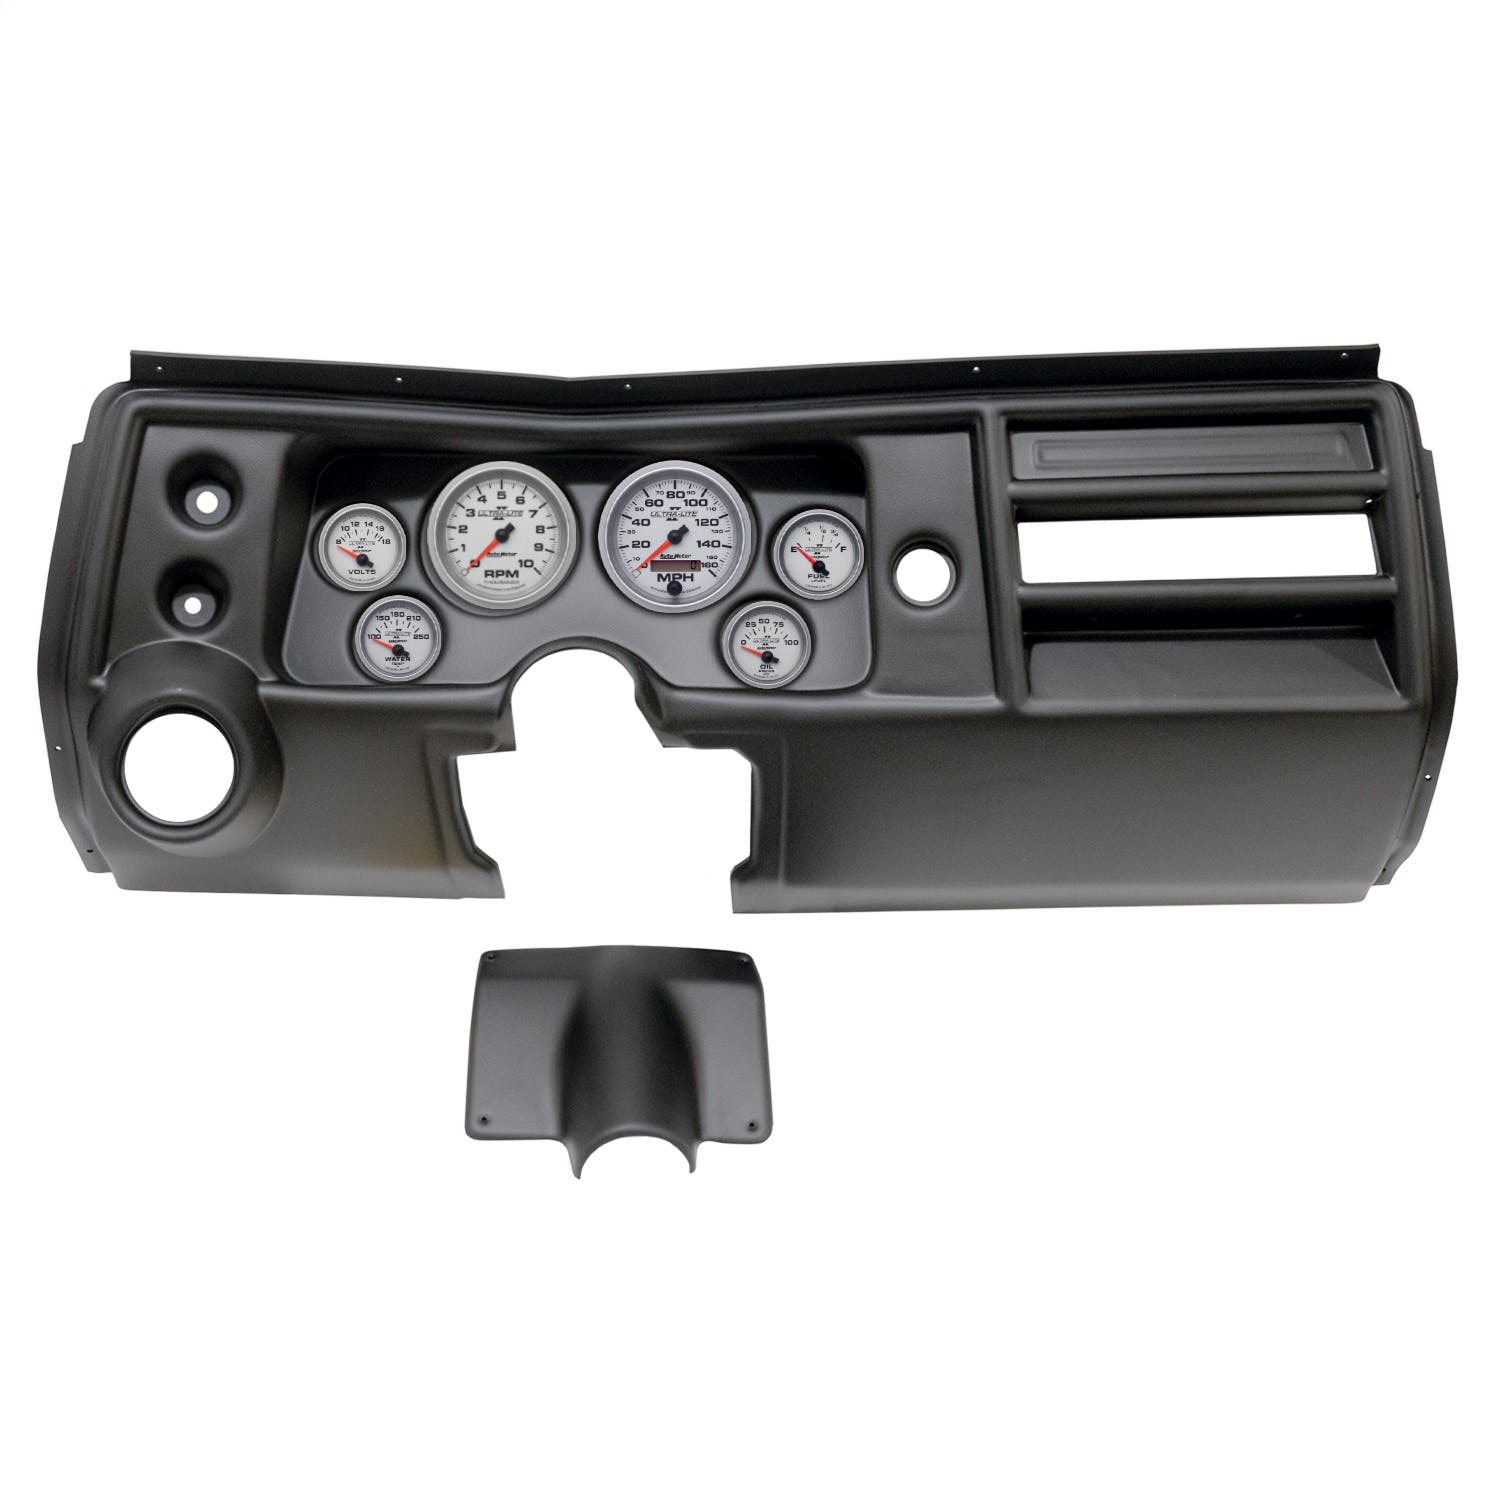 AutoMeter Products 2902-14 6 Gauge Direct-Fit Dash Kit, Chevy Chevelle Vent 68, Ultra-Lite II